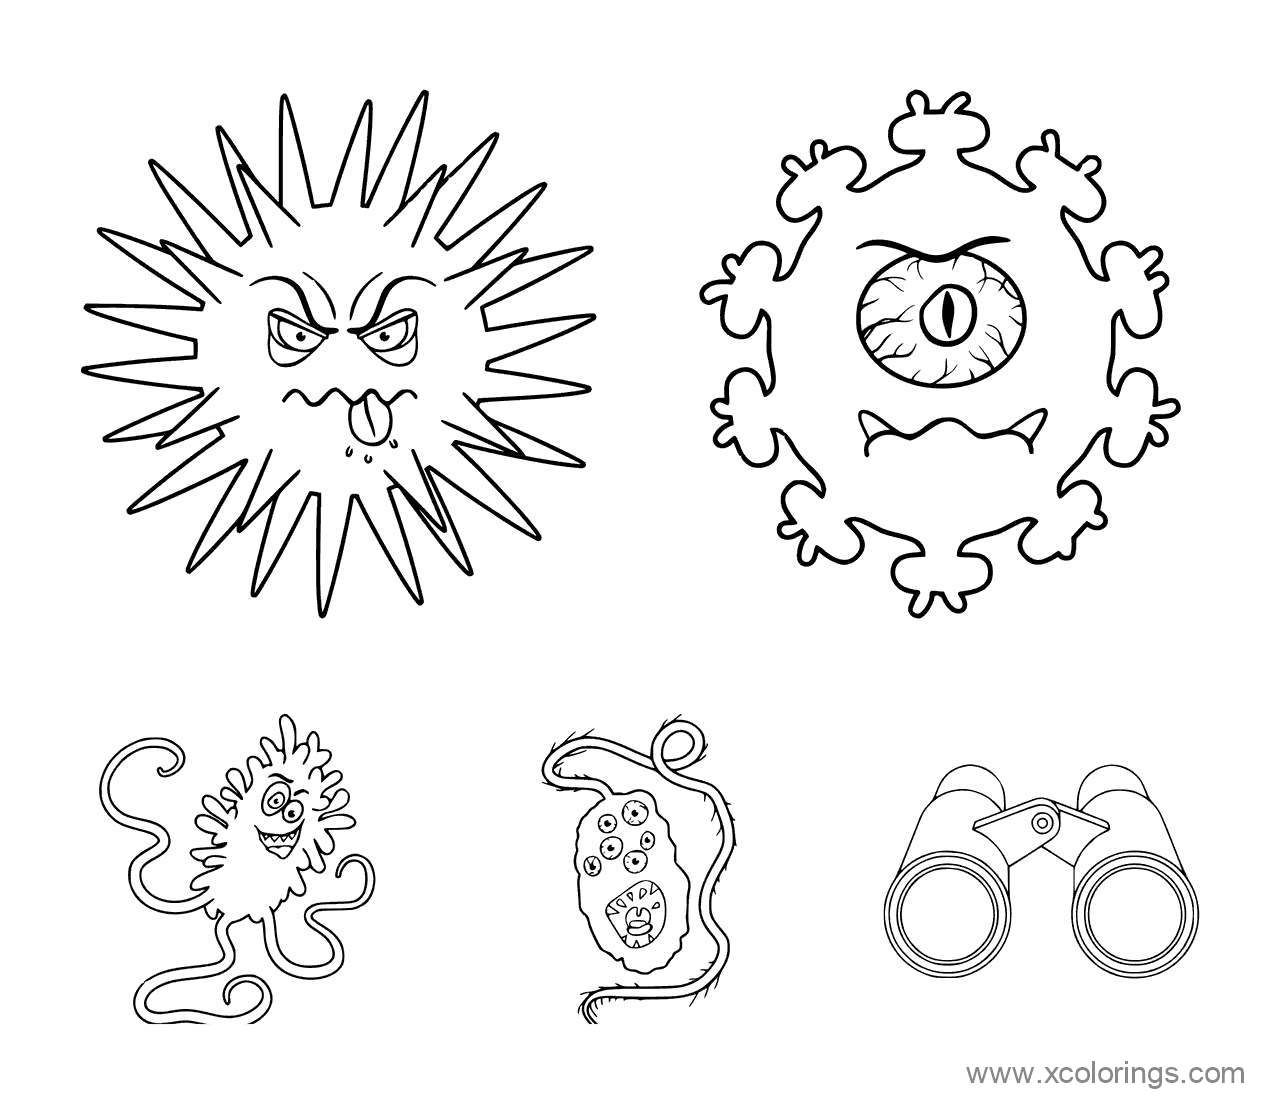 Free Virus Covid-19 Coloring Pages printable